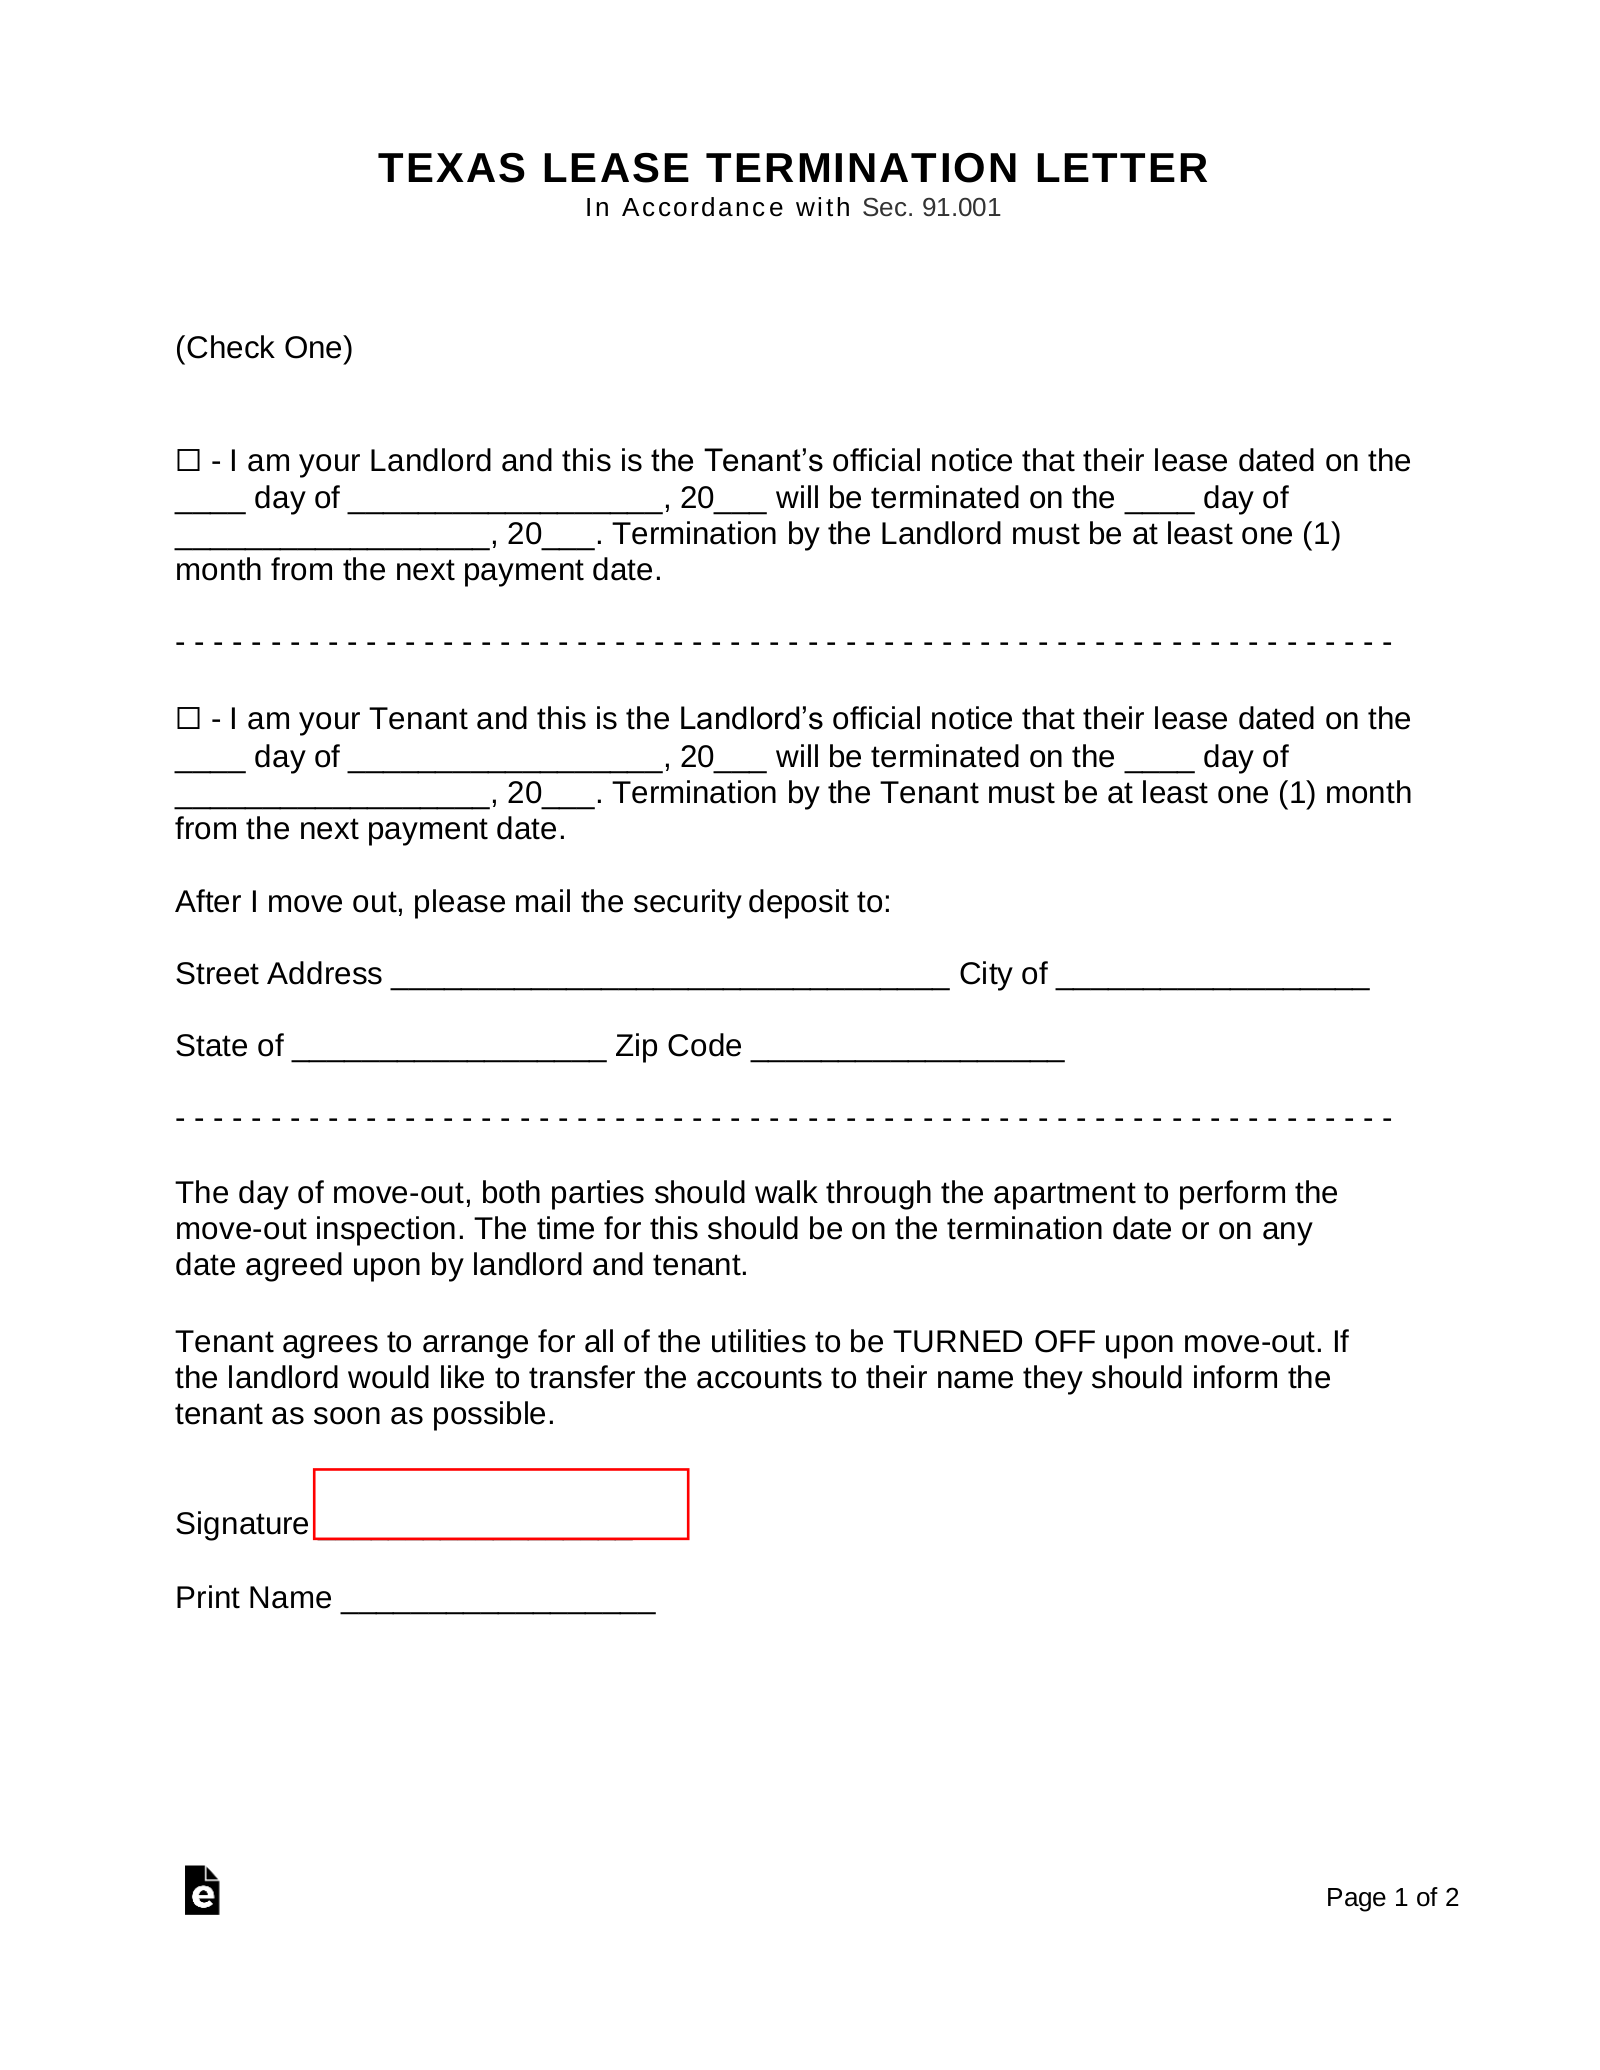 60 Day Notice Letter To Landlord Sample from eforms.com